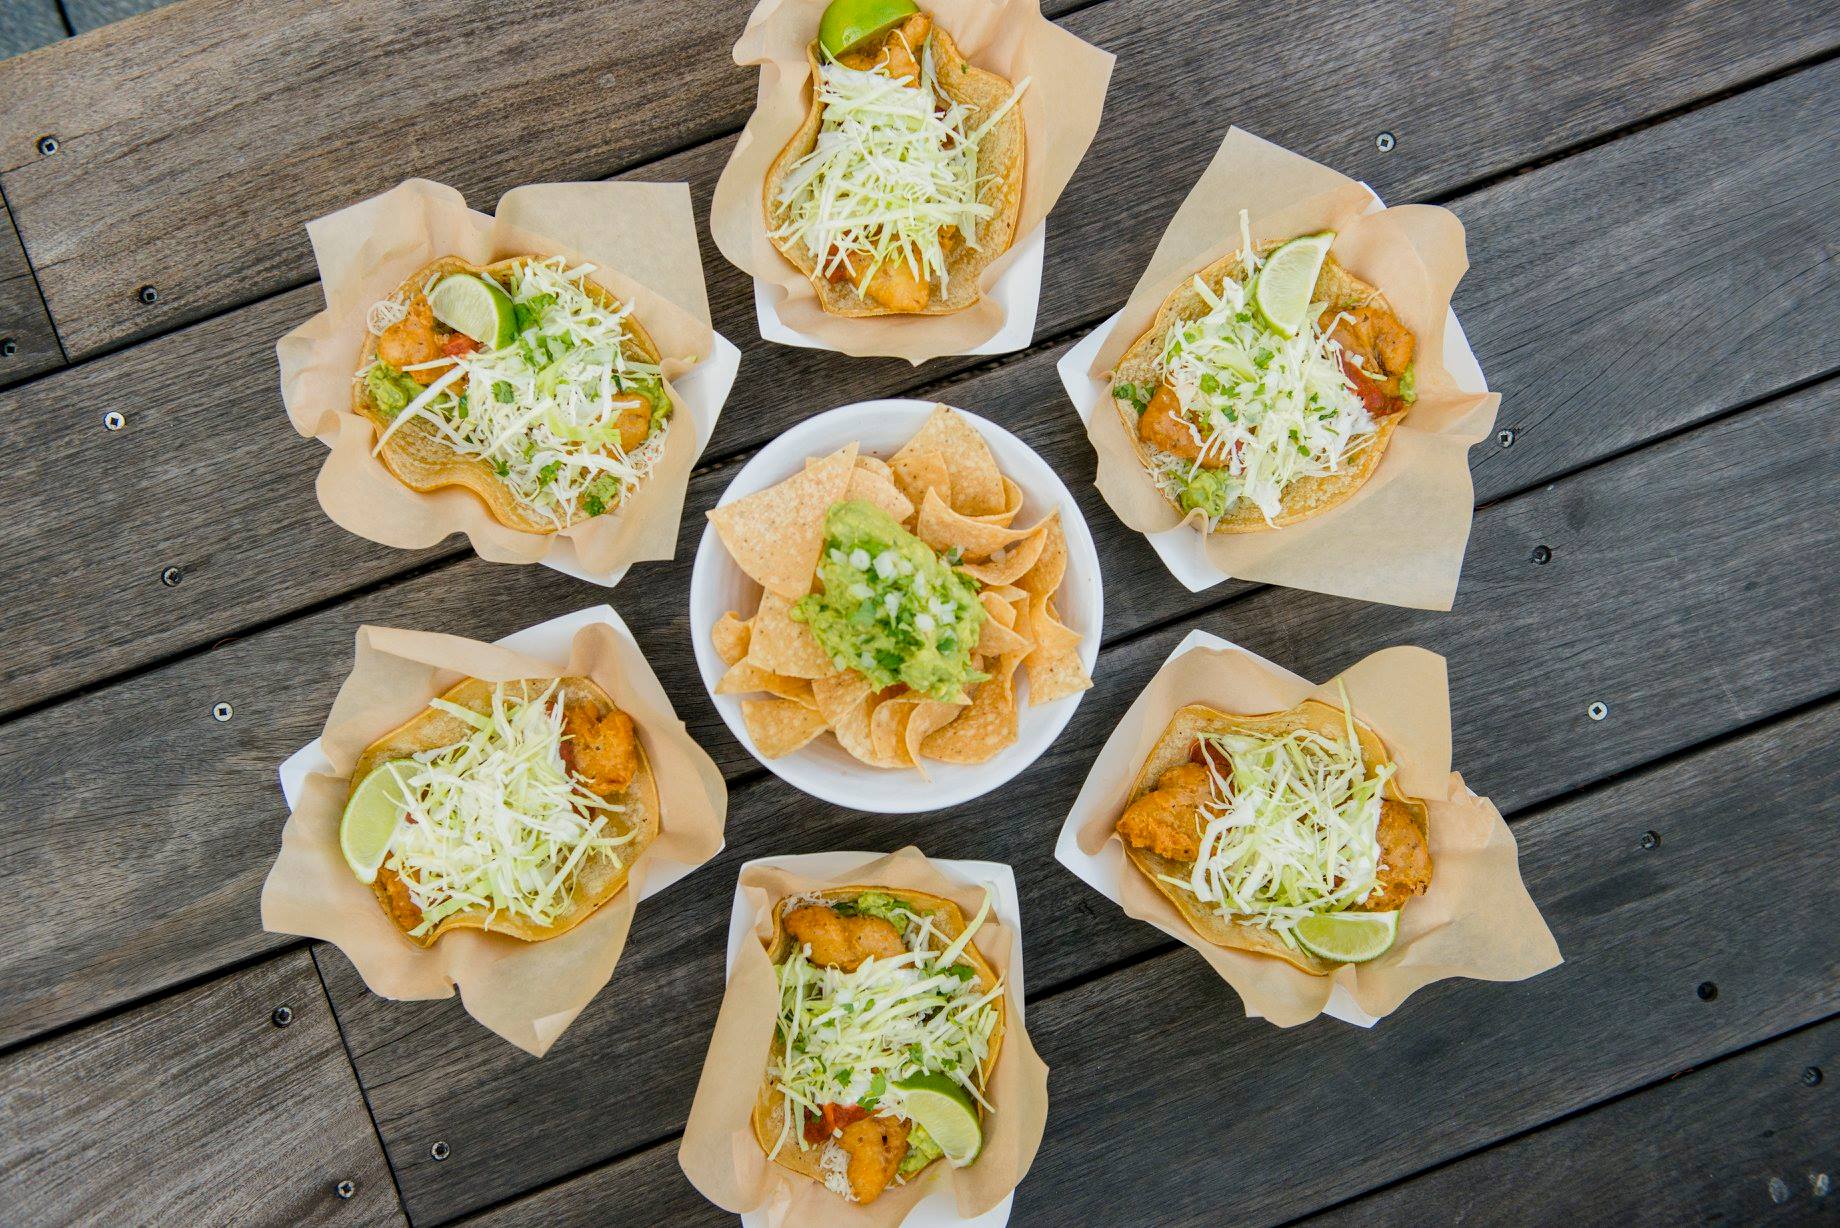 Today only: Free chips & guac with any purchase at Rubio’s Coastal Grill